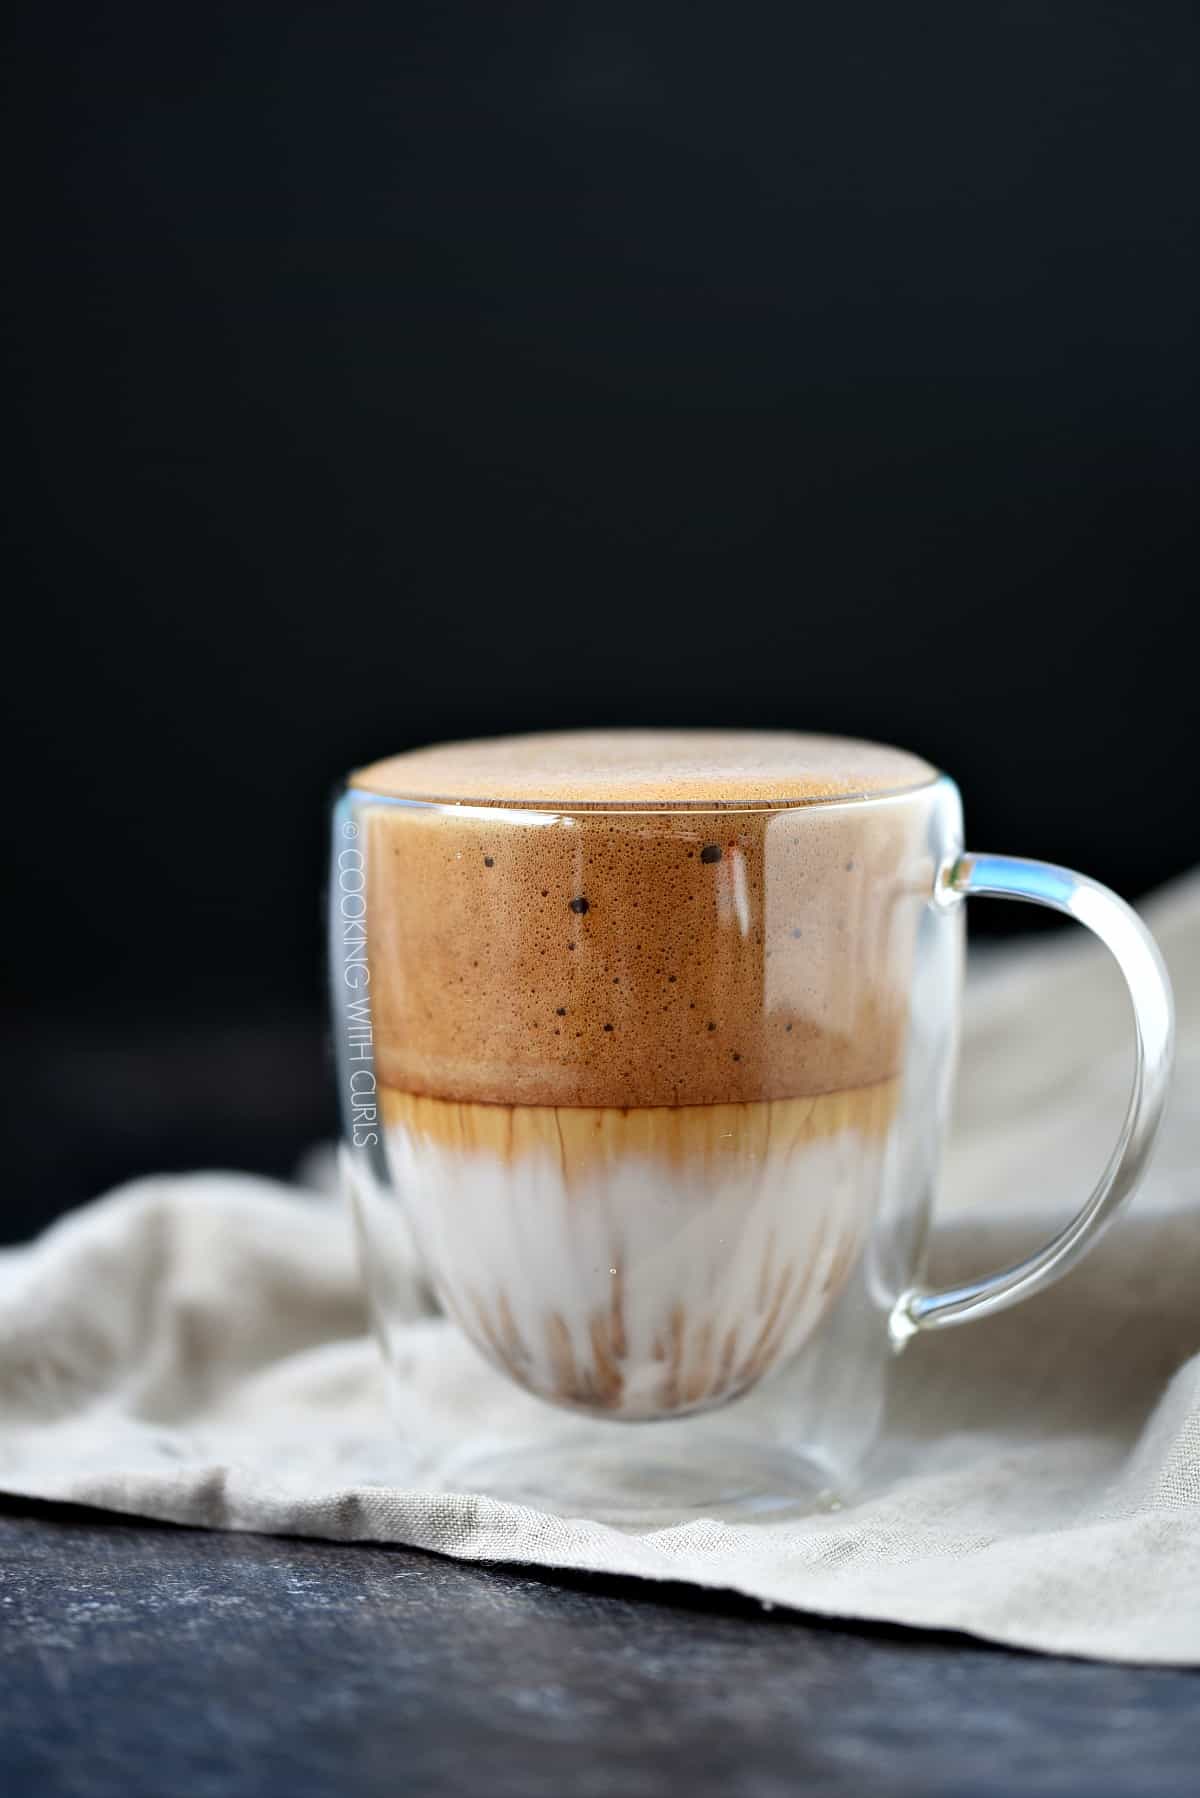 Keto version of a Whipped Dalgona Coffee made with Swerve and unsweetened vanilla almond milk. 